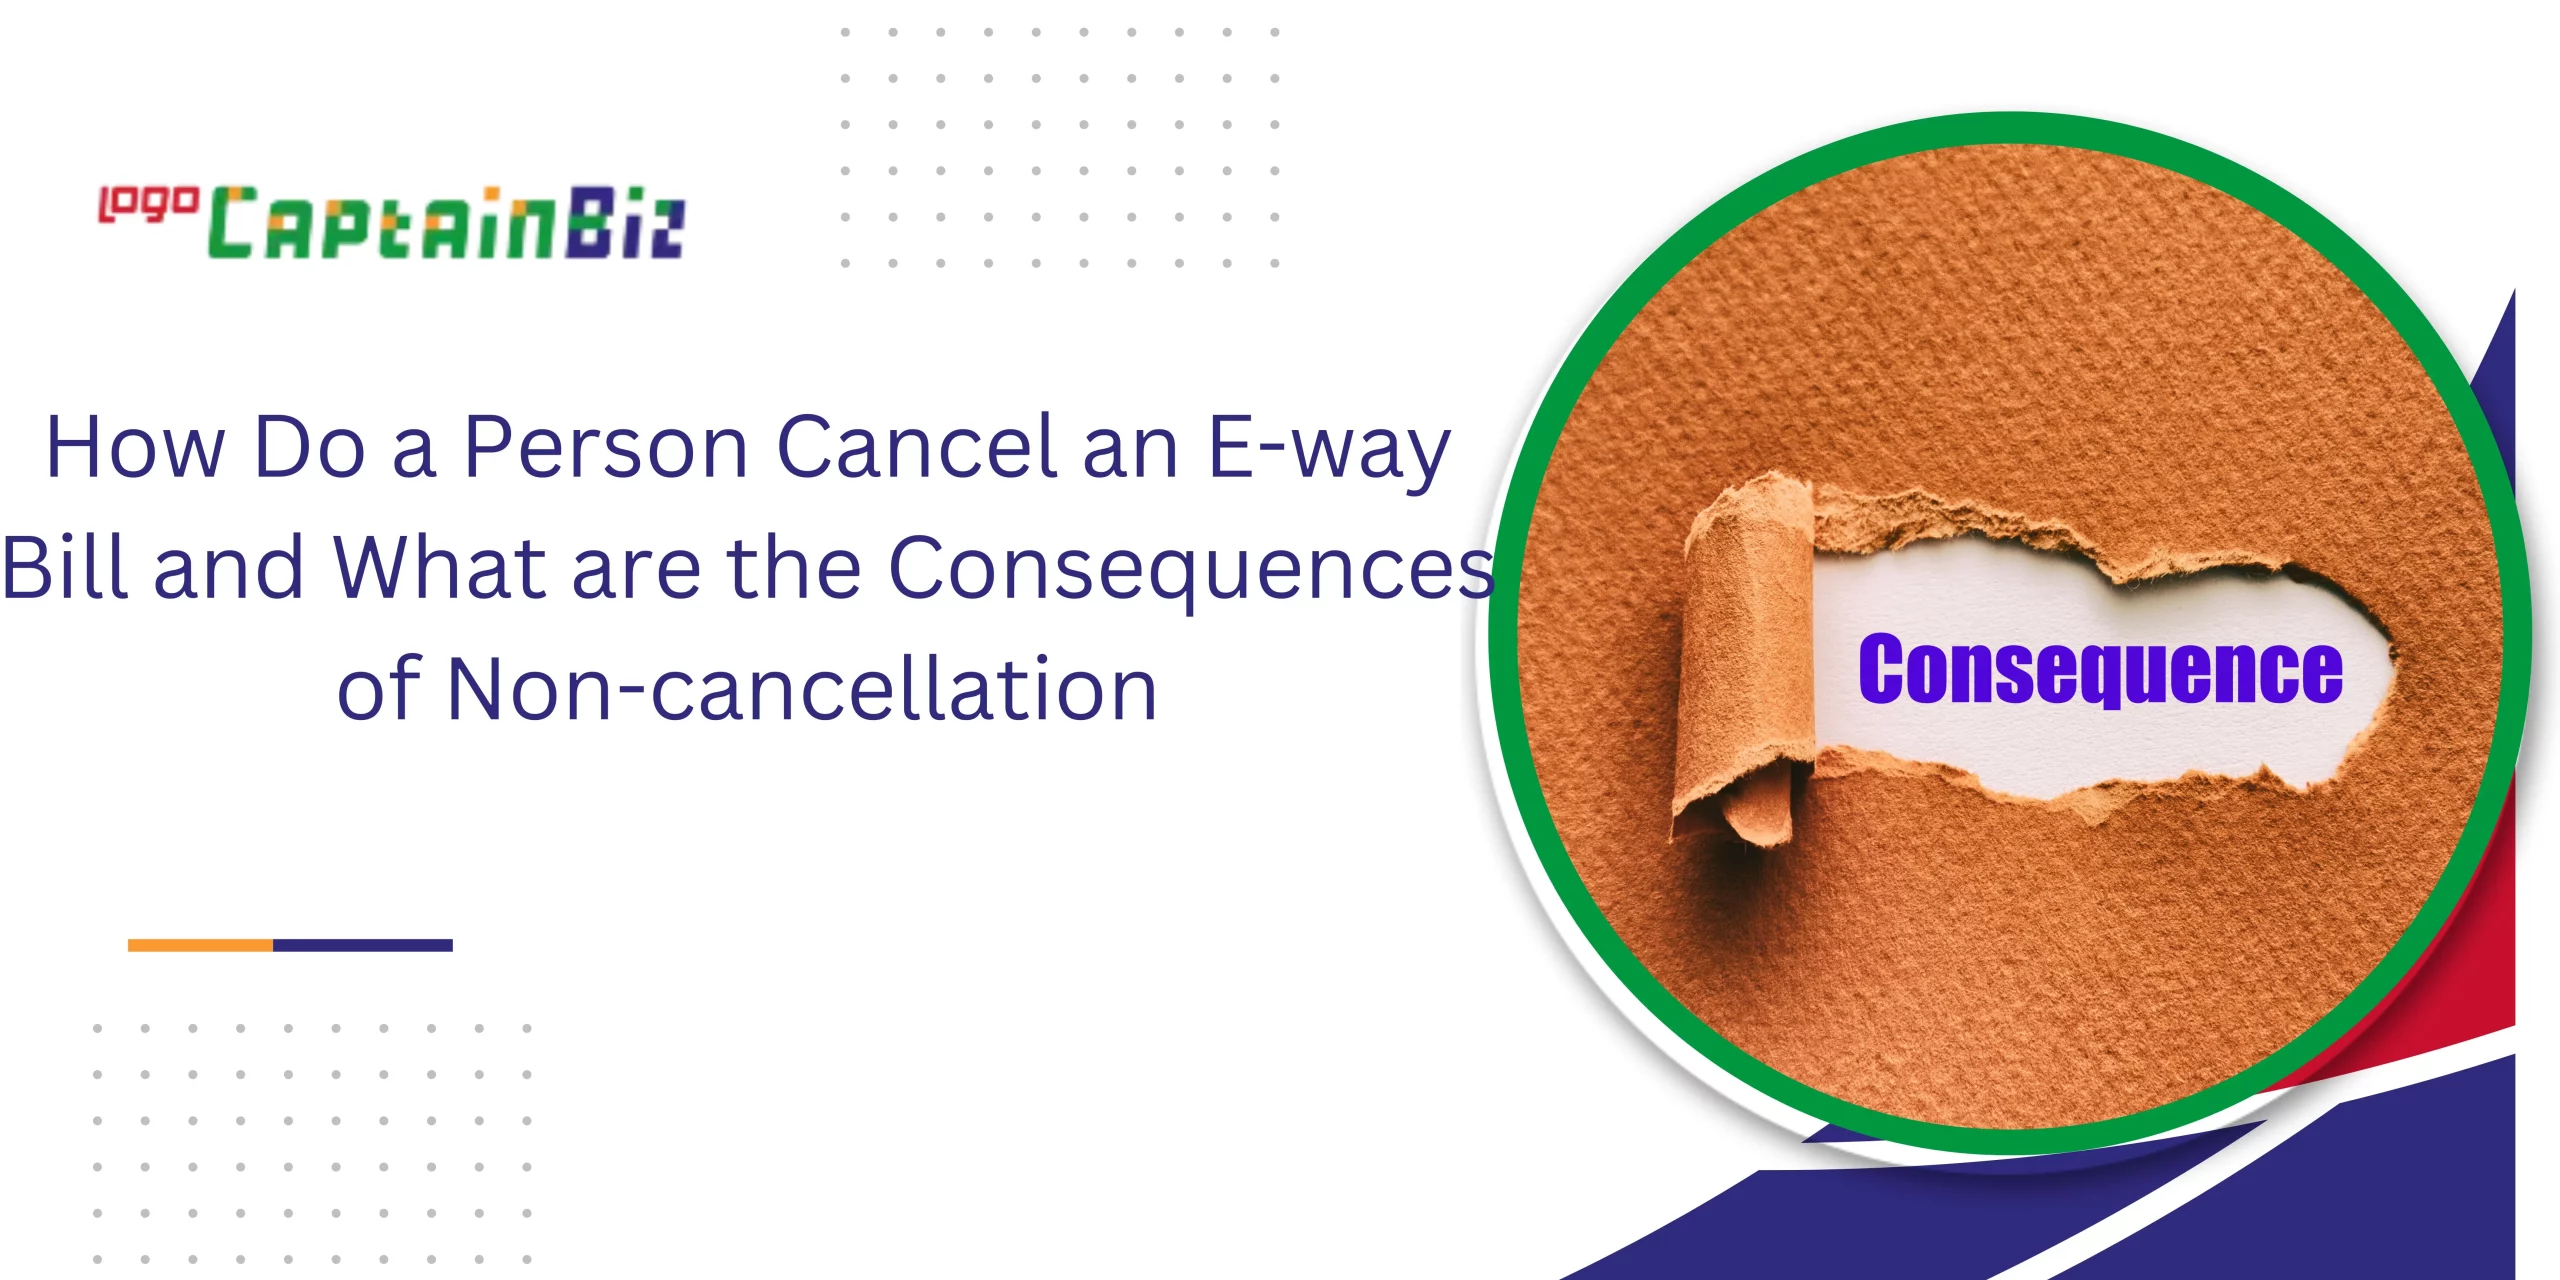 CaptainBiz: How Do a Person Cancel an E-way Bill and What are the Consequences of Non-cancellation